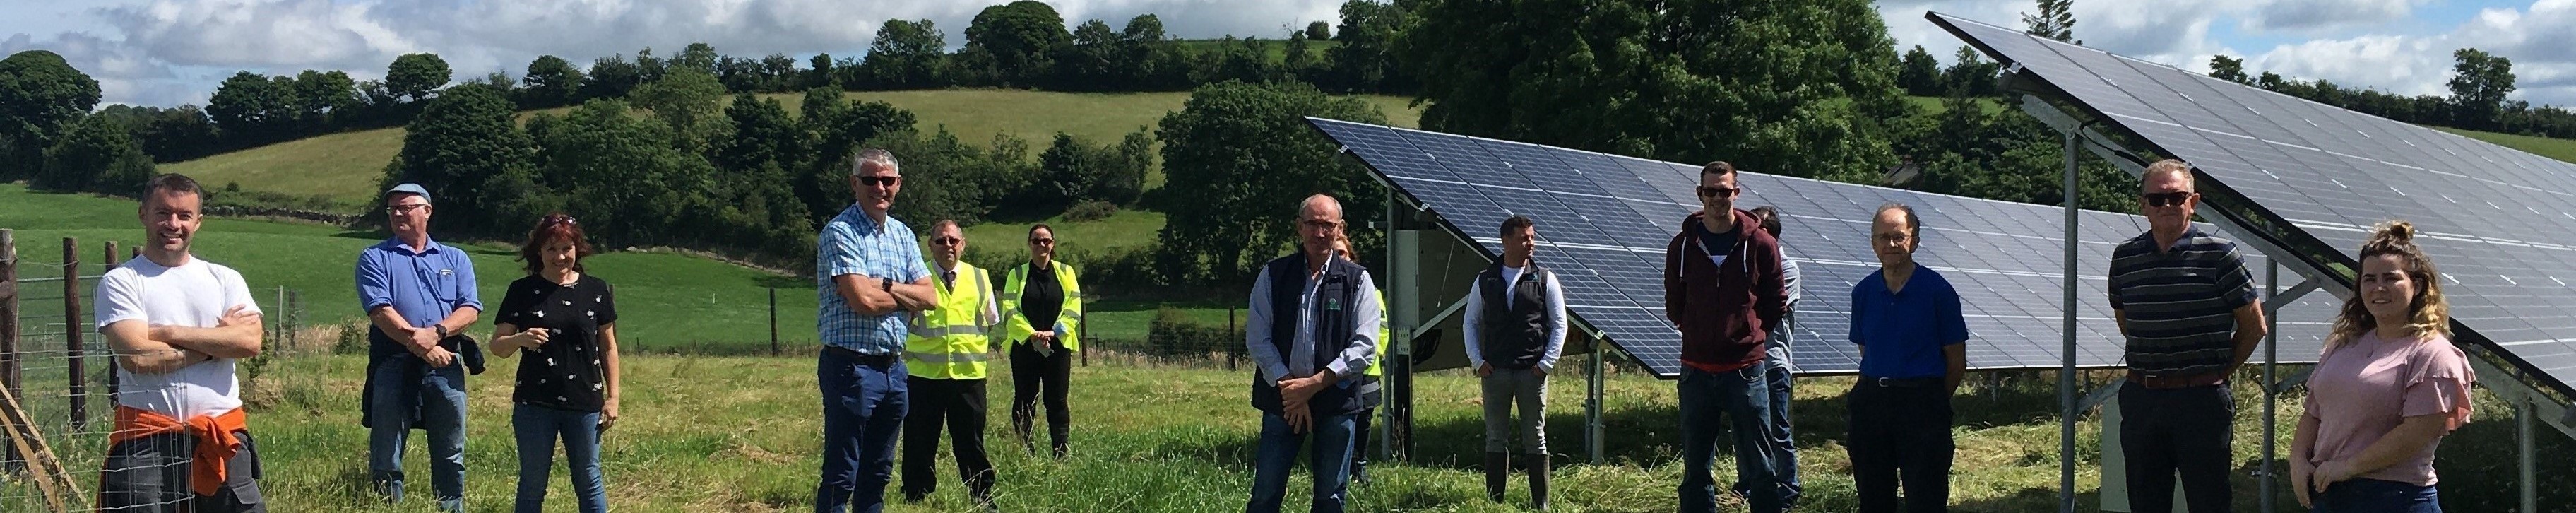 Site visit to Solar PV project in Ireland